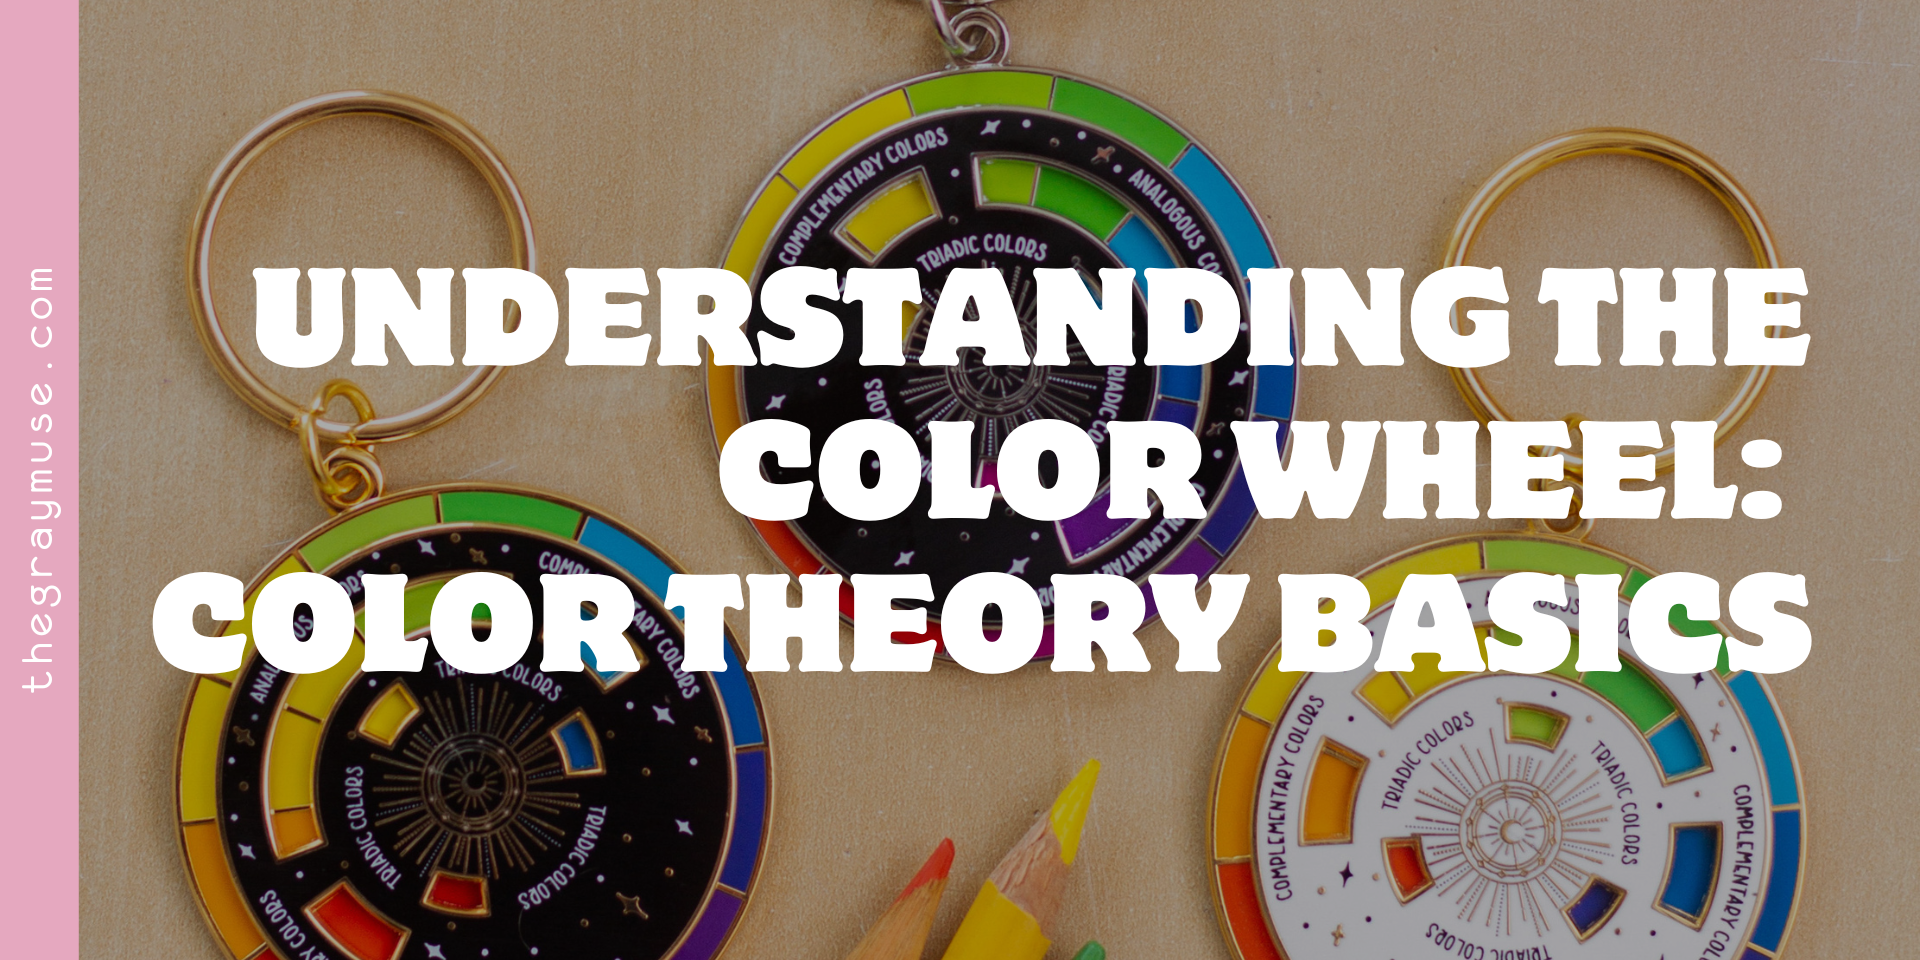 understanding the color wheel: color theory basics